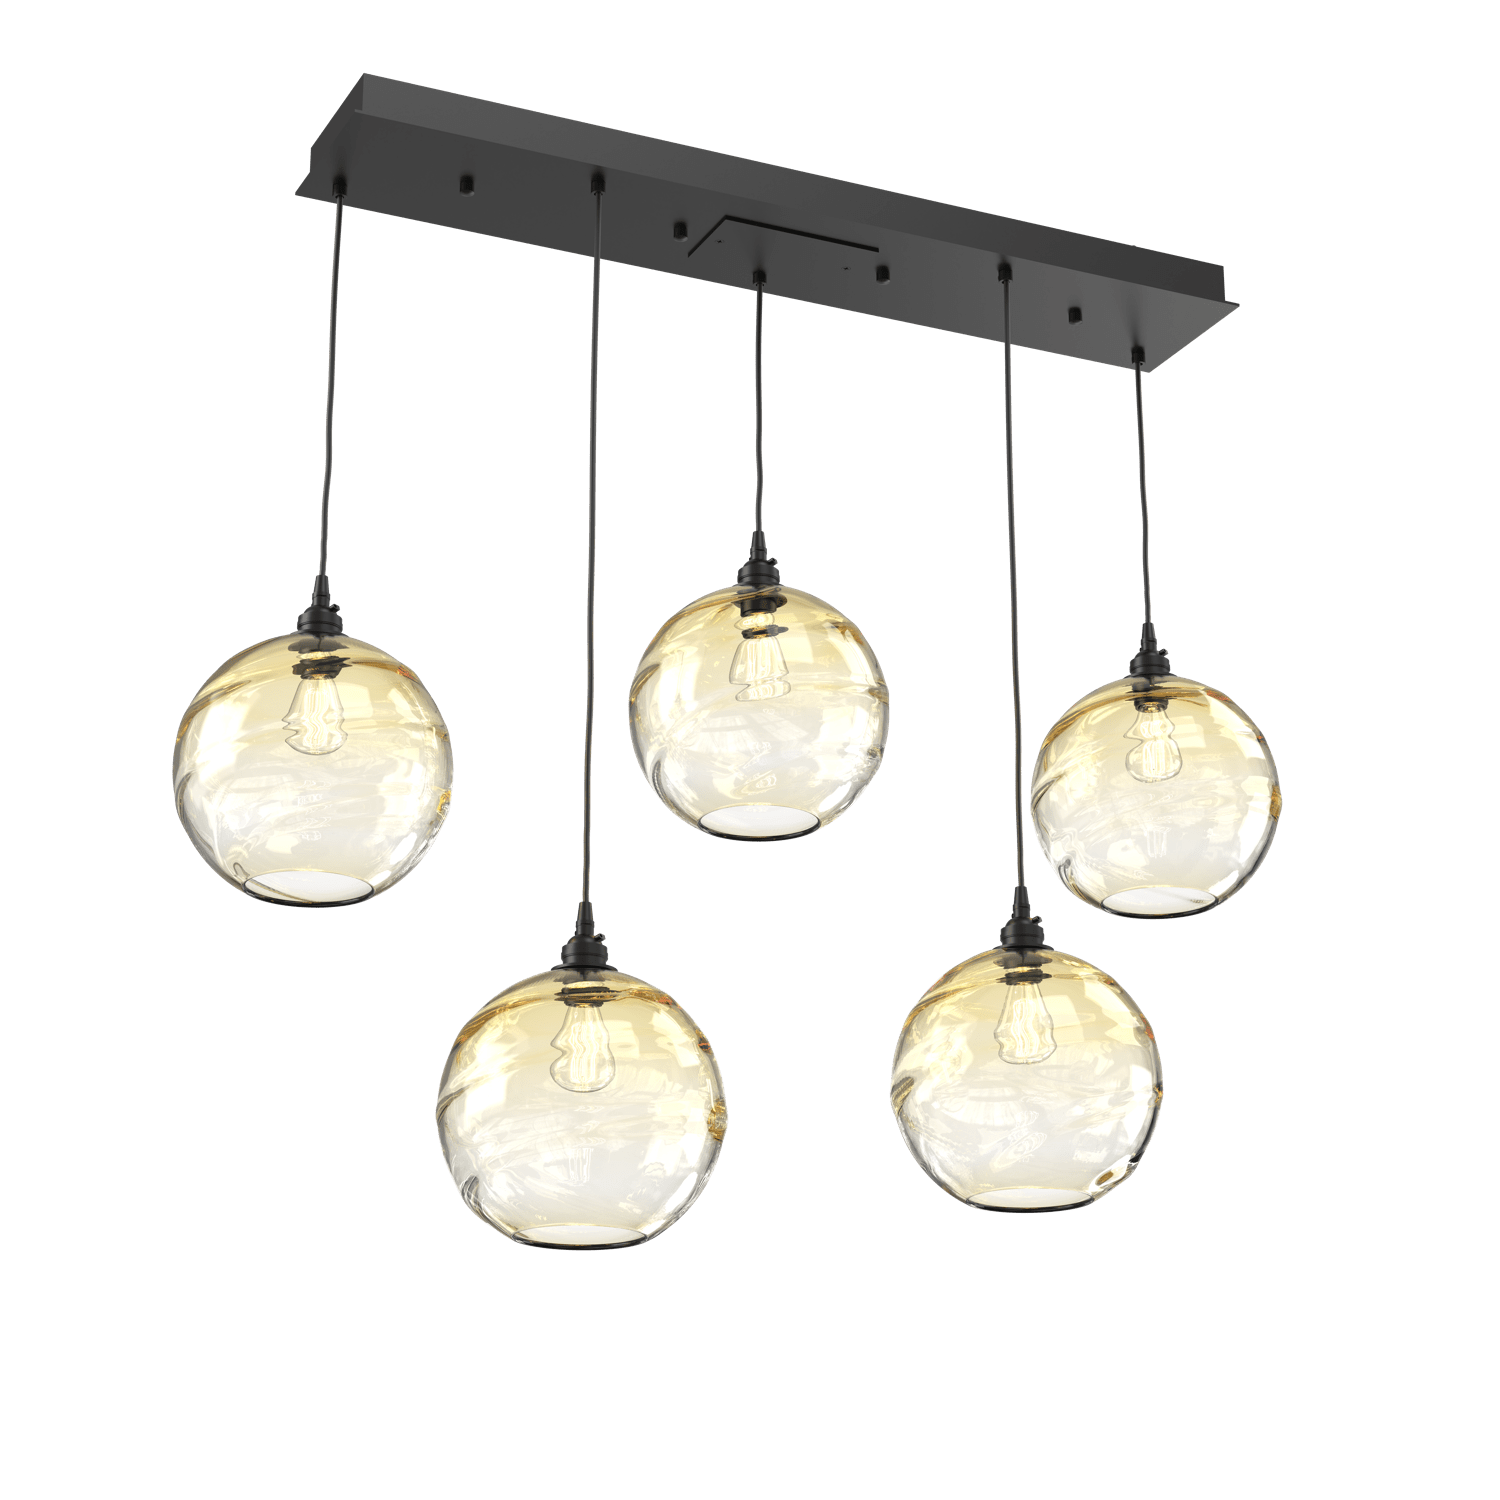 PLB0047-05-MB-OA-Hammerton-Studio-Optic-Blown-Glass-Terra-5-light-linear-pendant-chandelier-with-matte-black-finish-and-optic-amber-blown-glass-shades-and-incandescent-lamping